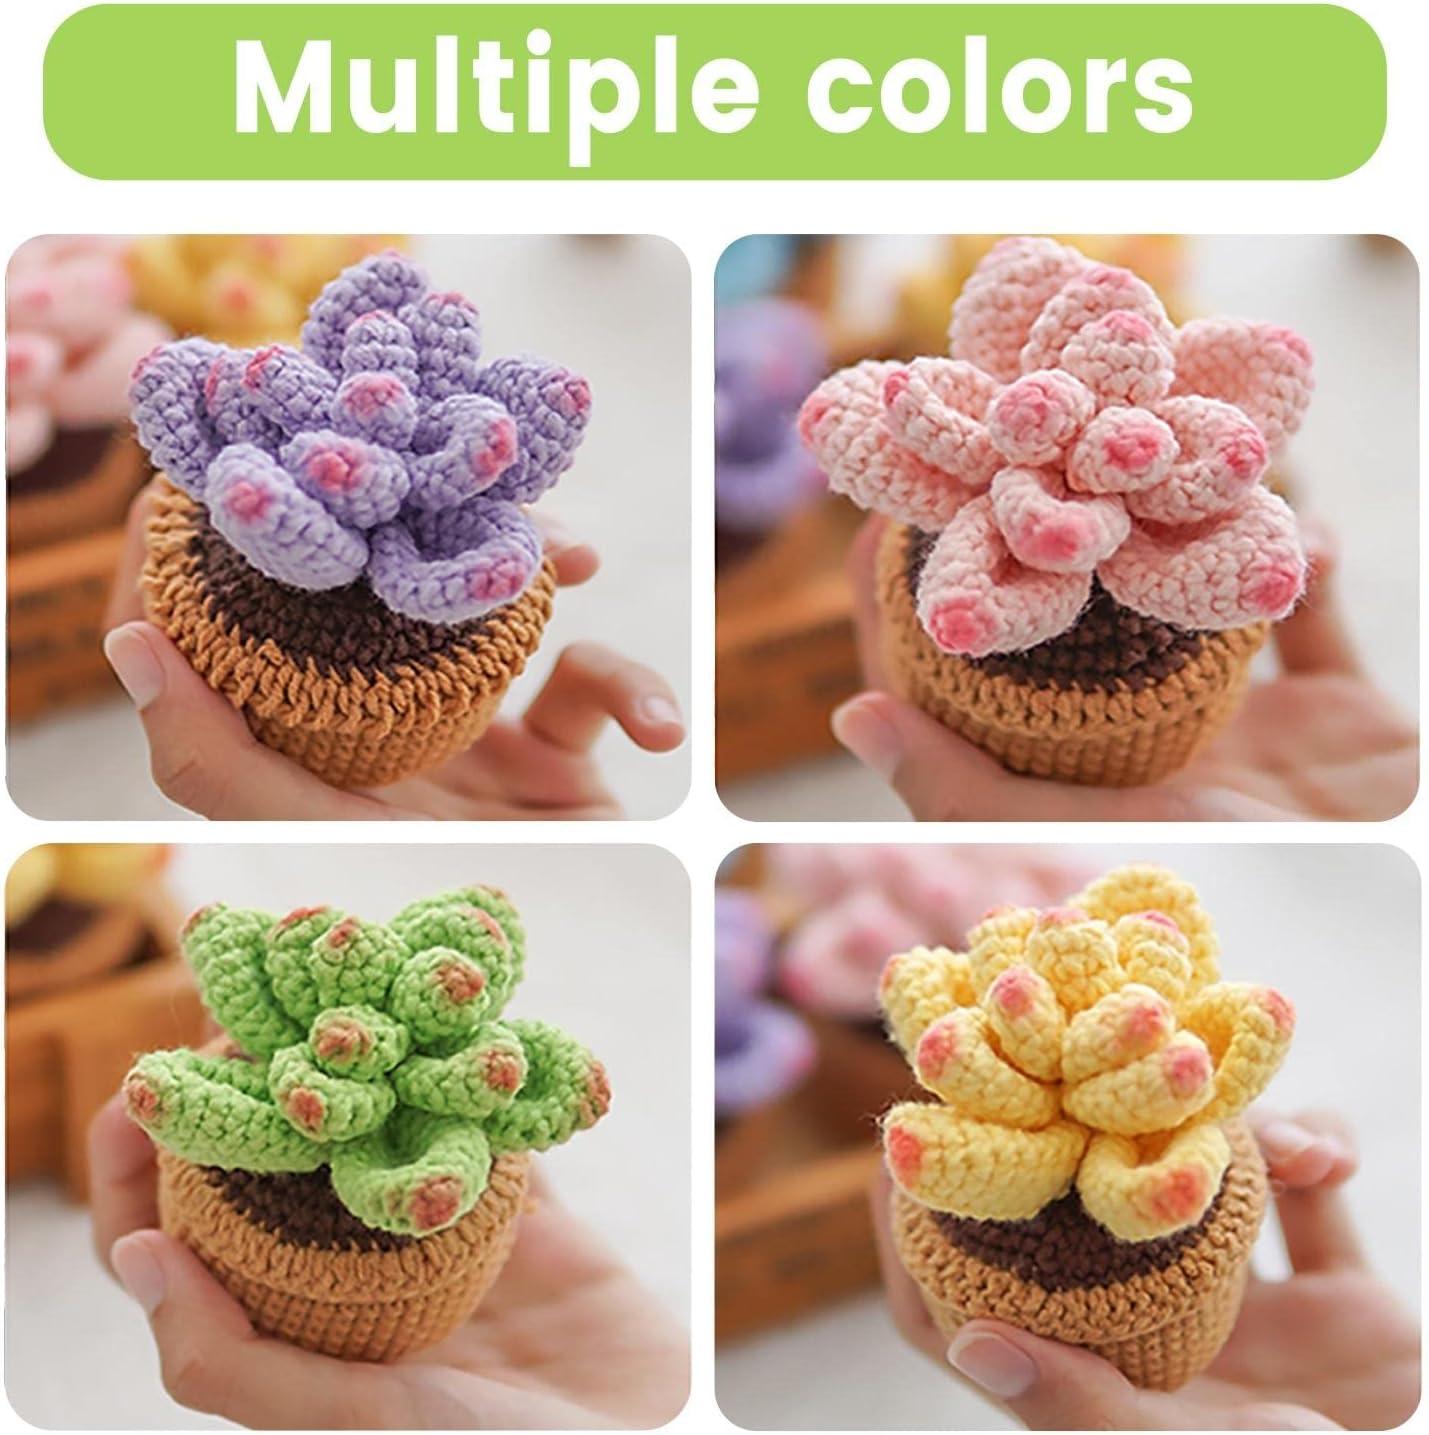  FECLOUD Crochet Knitting Kit for Beginners - 6Pcs Multicolored  Succulents, Beginner Crochet Knitting Kit Kits for Beginners Adults,  Step-by-Step Video Tutorials, Learn to Knit Kits for Adults Beginner